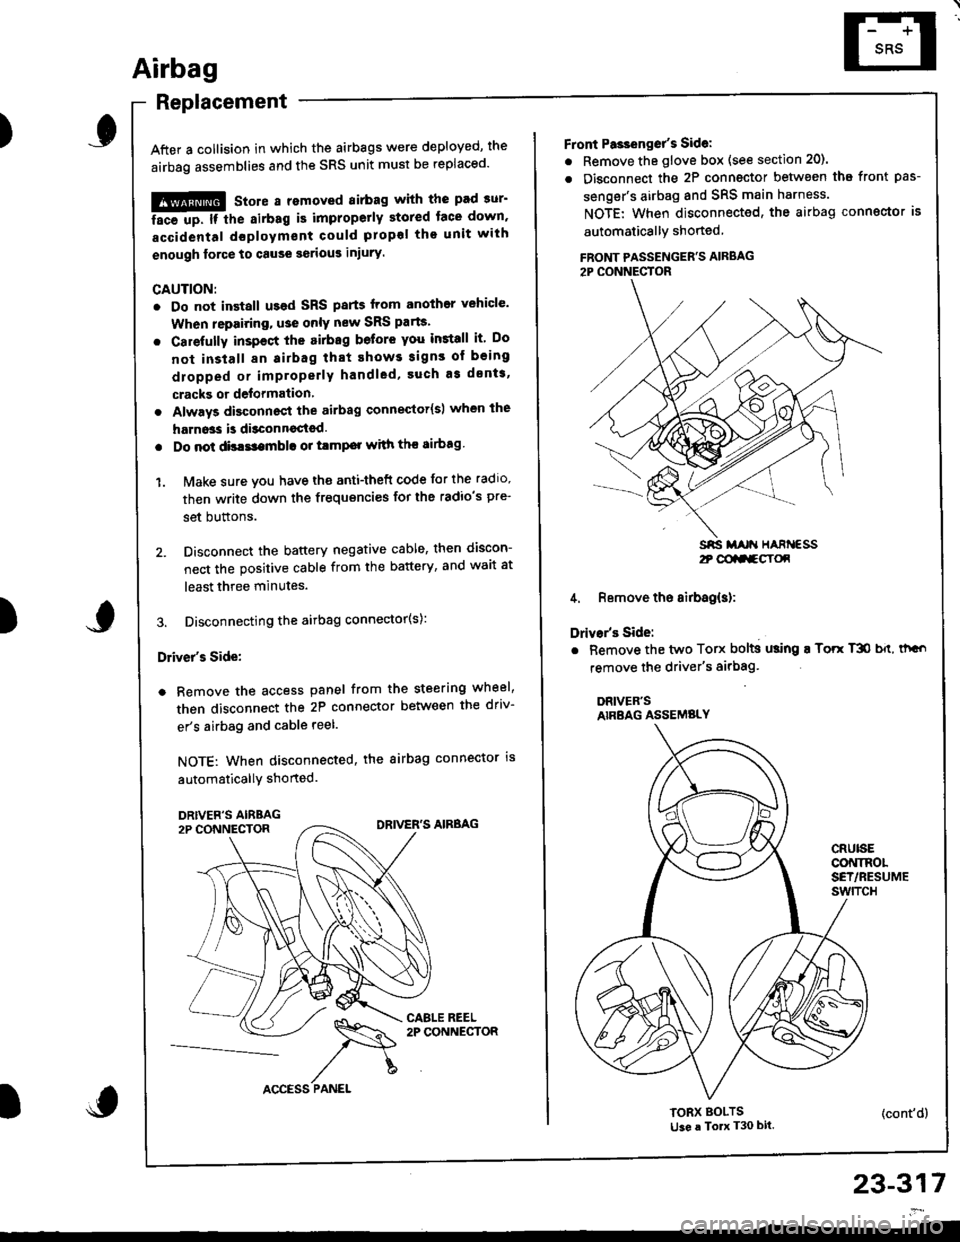 HONDA INTEGRA 1998 4.G Workshop Manual )
Airbag
Replacement
After a collision in which the airbags were deployed, the
airbag assemblies and the SRS unit must be replaced
!!@ stole a removed sirbag with the pad sur
ii6--up. tt tle sirbag 